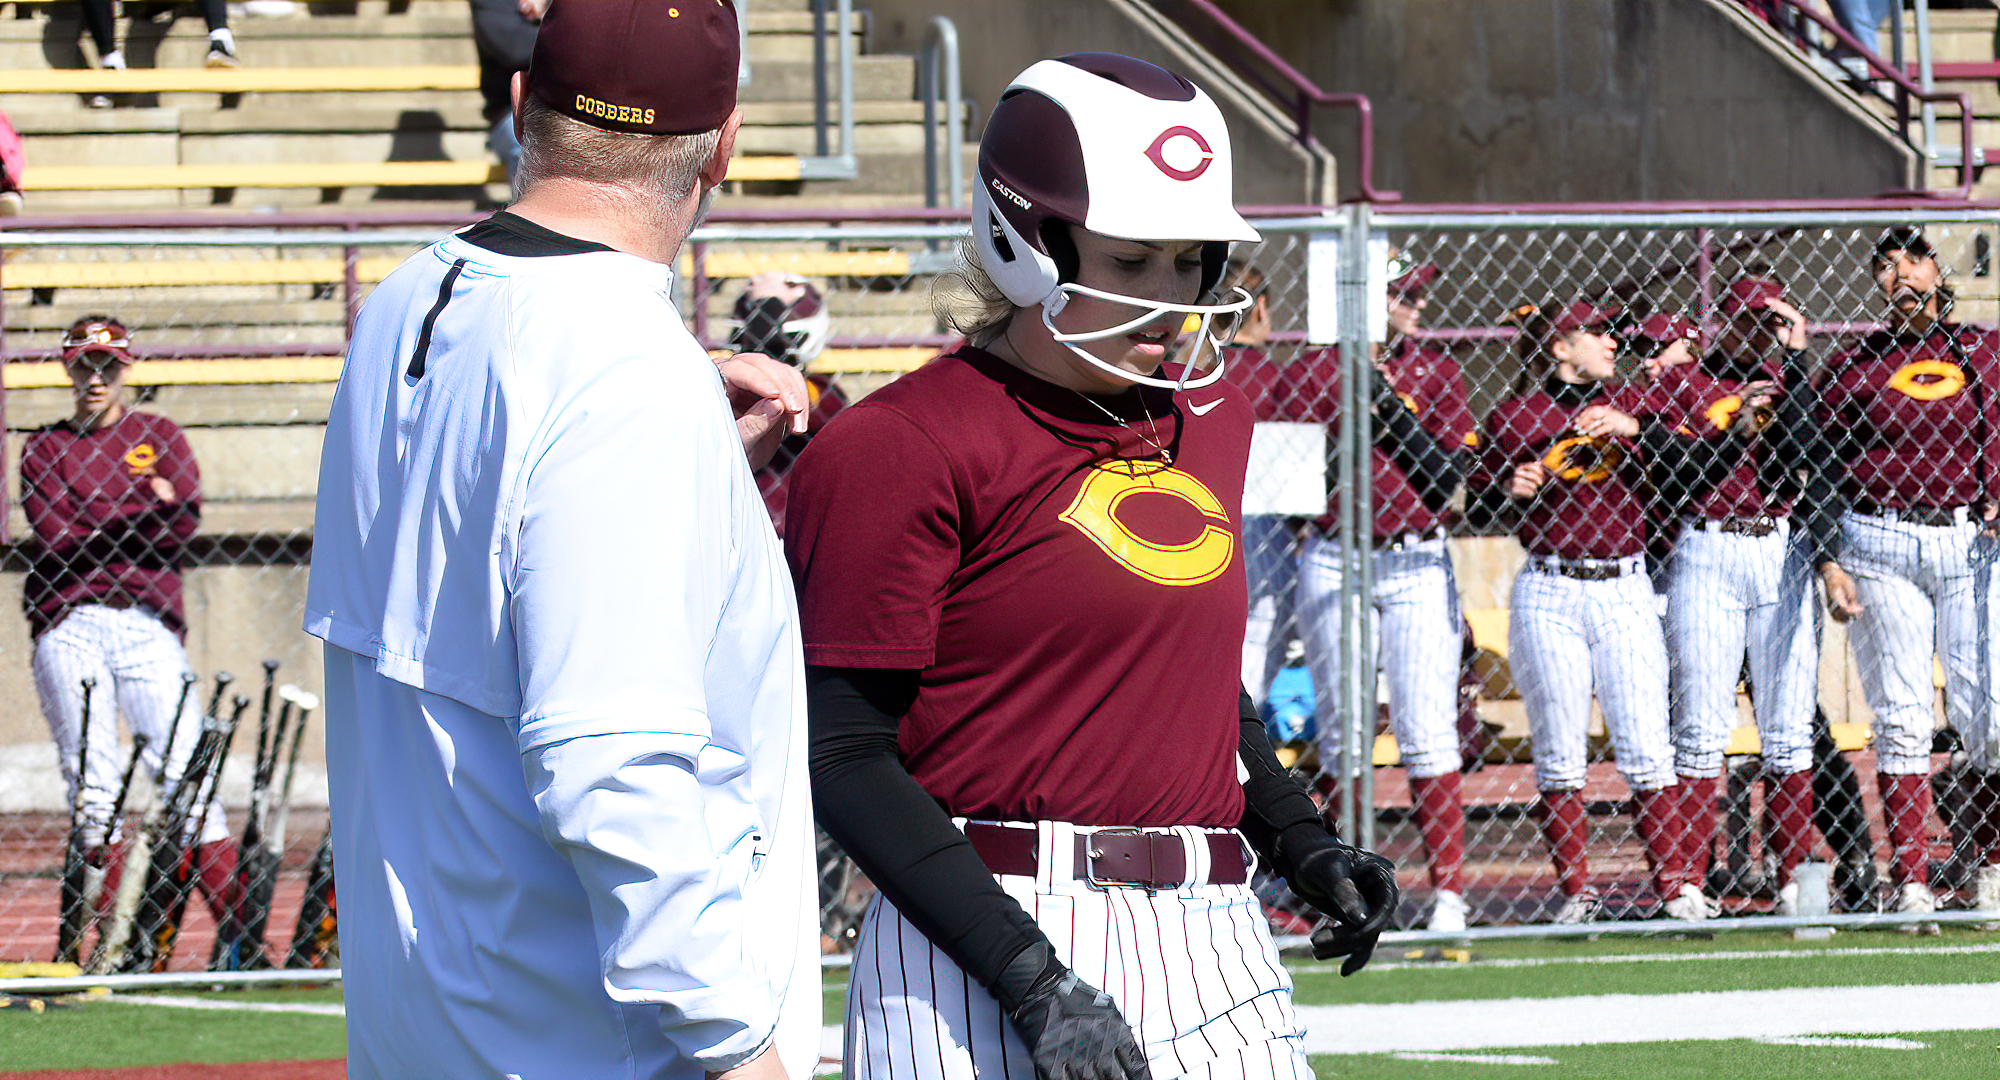 Landry Maragos hit a 3-run homer in the bottom of the seventh inning to give the Cobbers an 11-9 victory in Game 2 at St. Catherine.